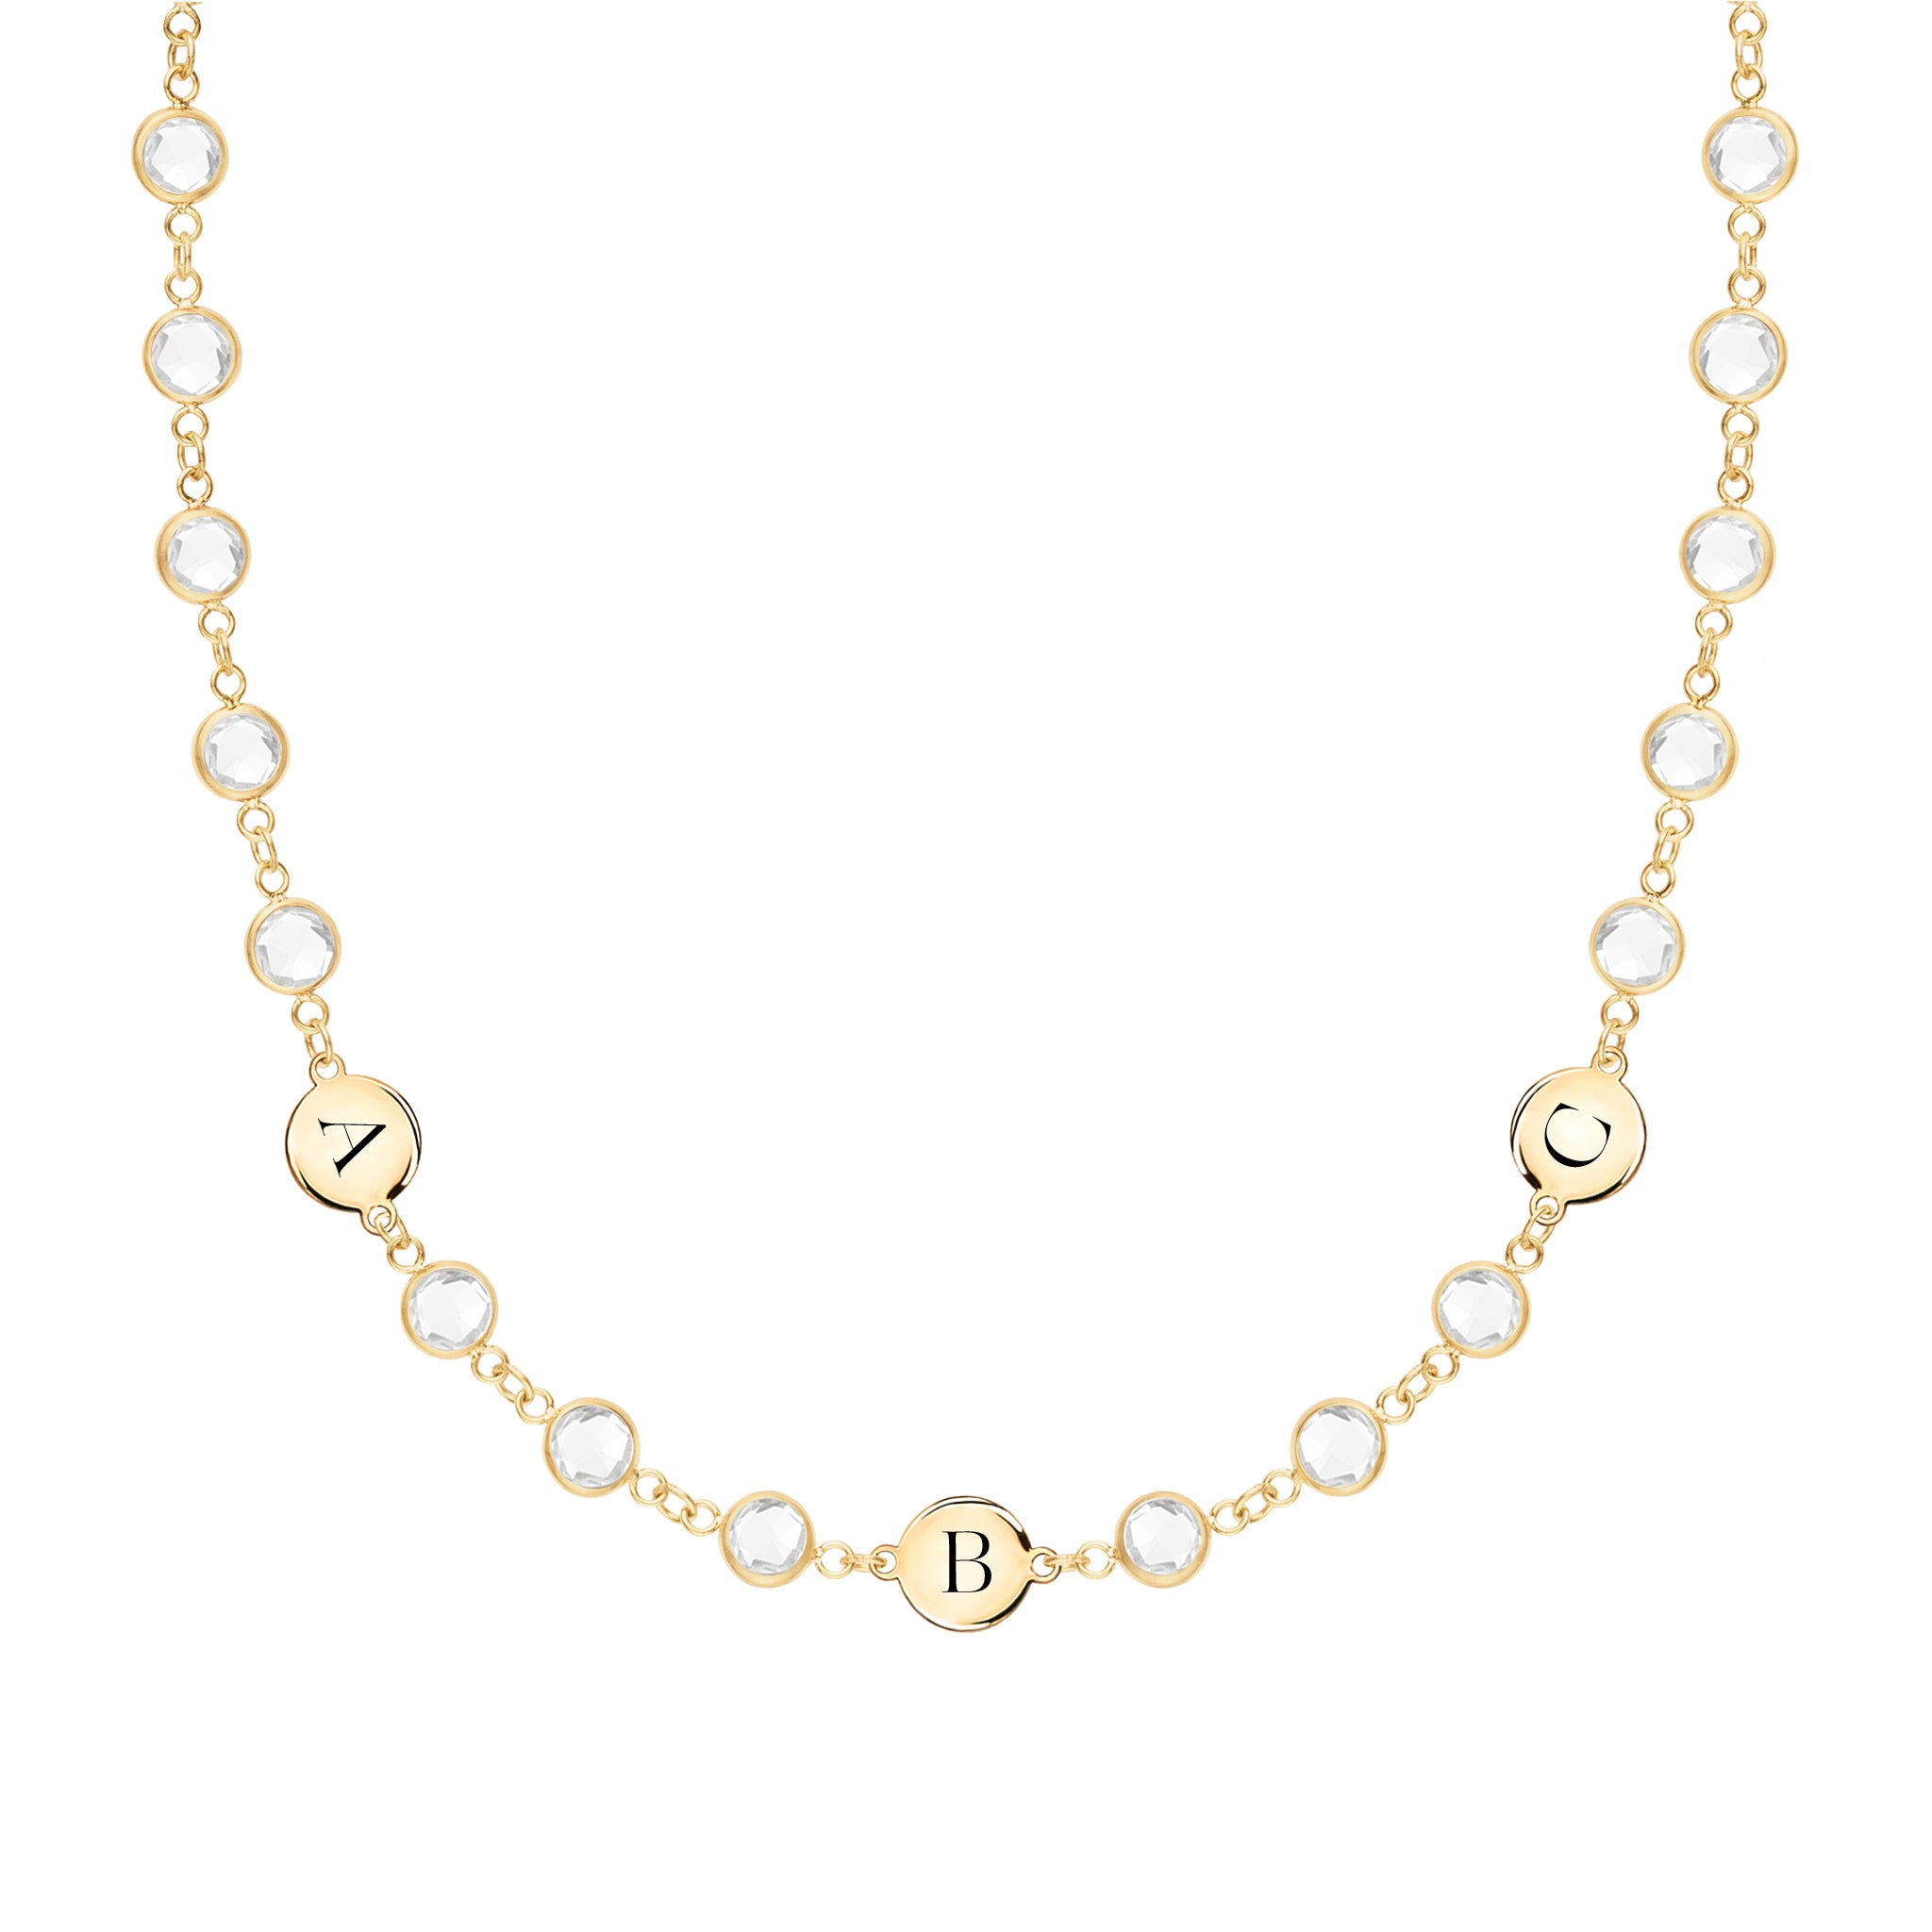 Personalized Rosecliff Circle Birthstone Necklace in 14k Gold